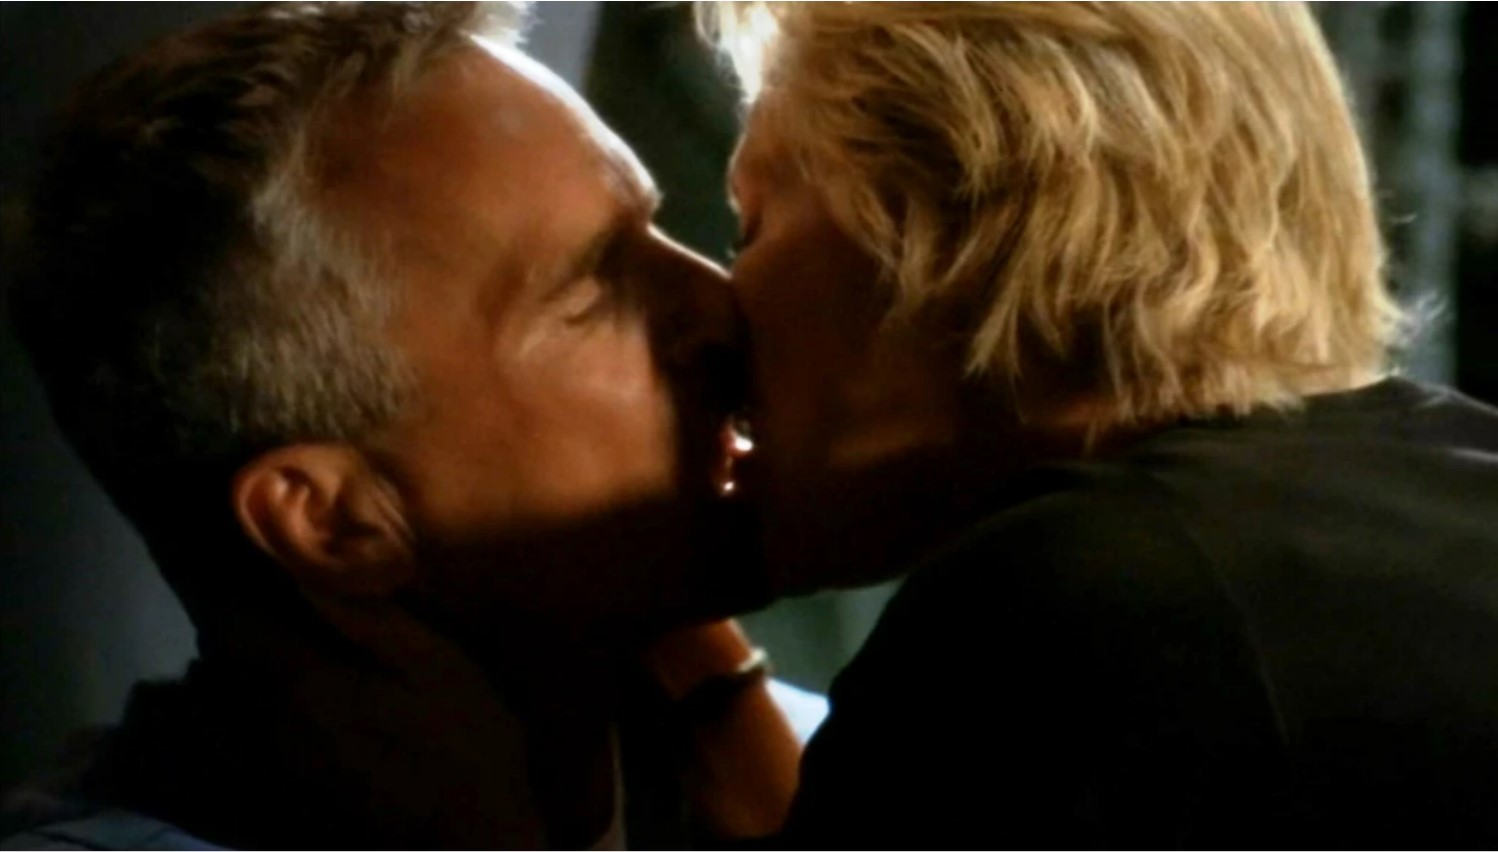 Amanda Tapping kissing Richard Dean Anderson (screenshot from "Grace", aired Jan. 16, 2004)